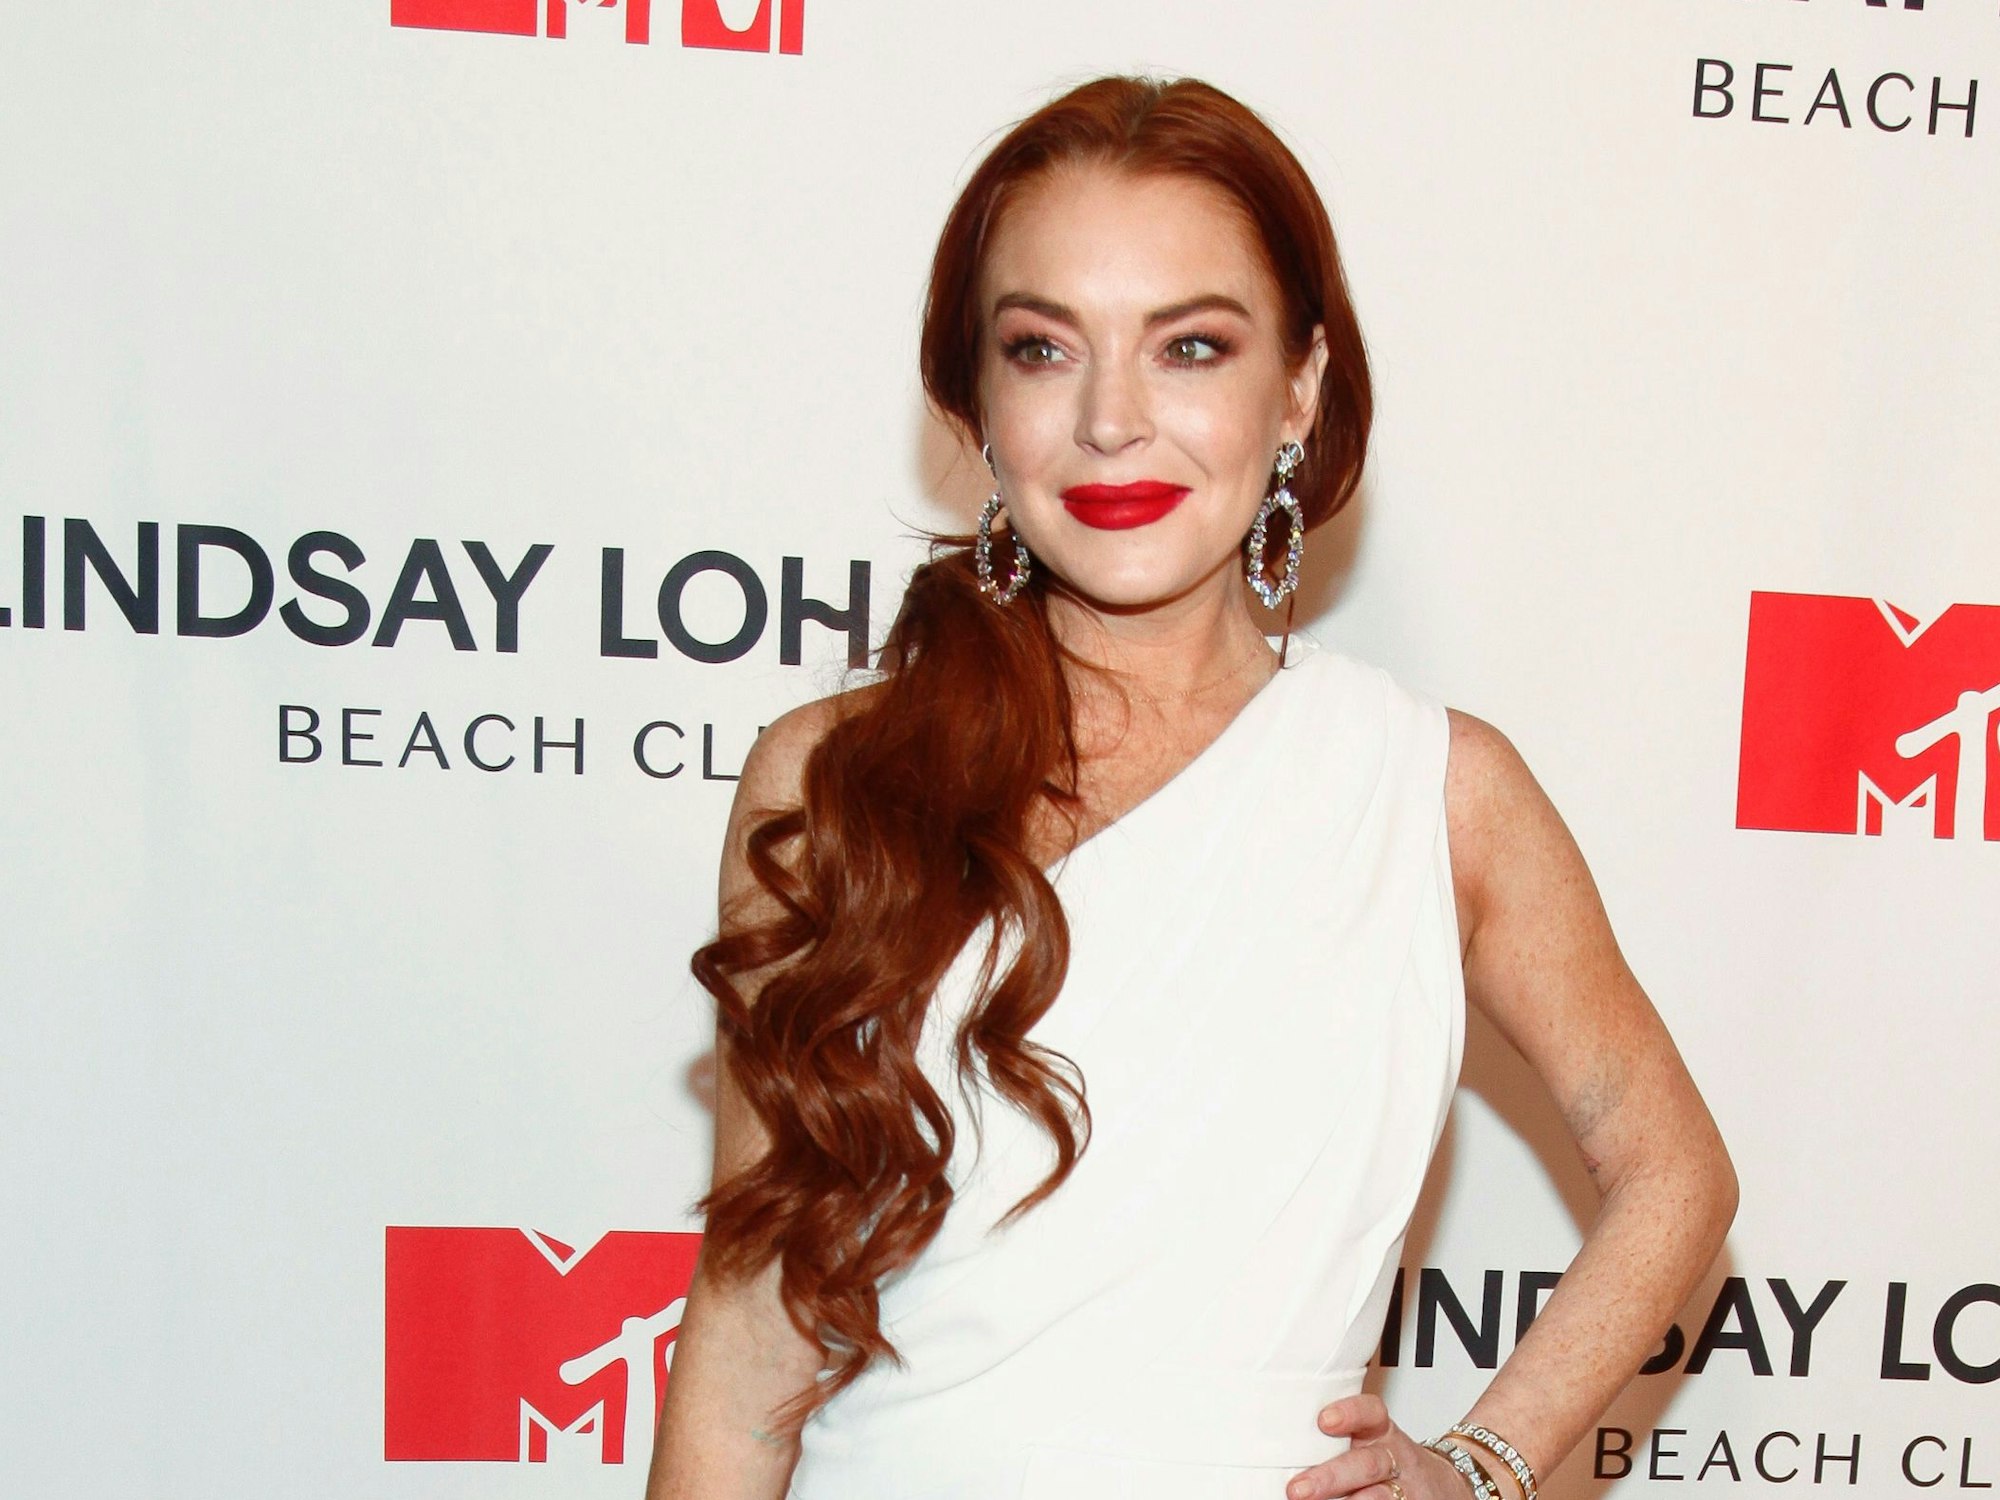 Lindsay Lohan besucht MTVs "Lindsay Lohan's Beach Club"-Serie Premierenparty auf dem Magic Hour Rooftop am The Moxy Times Square.